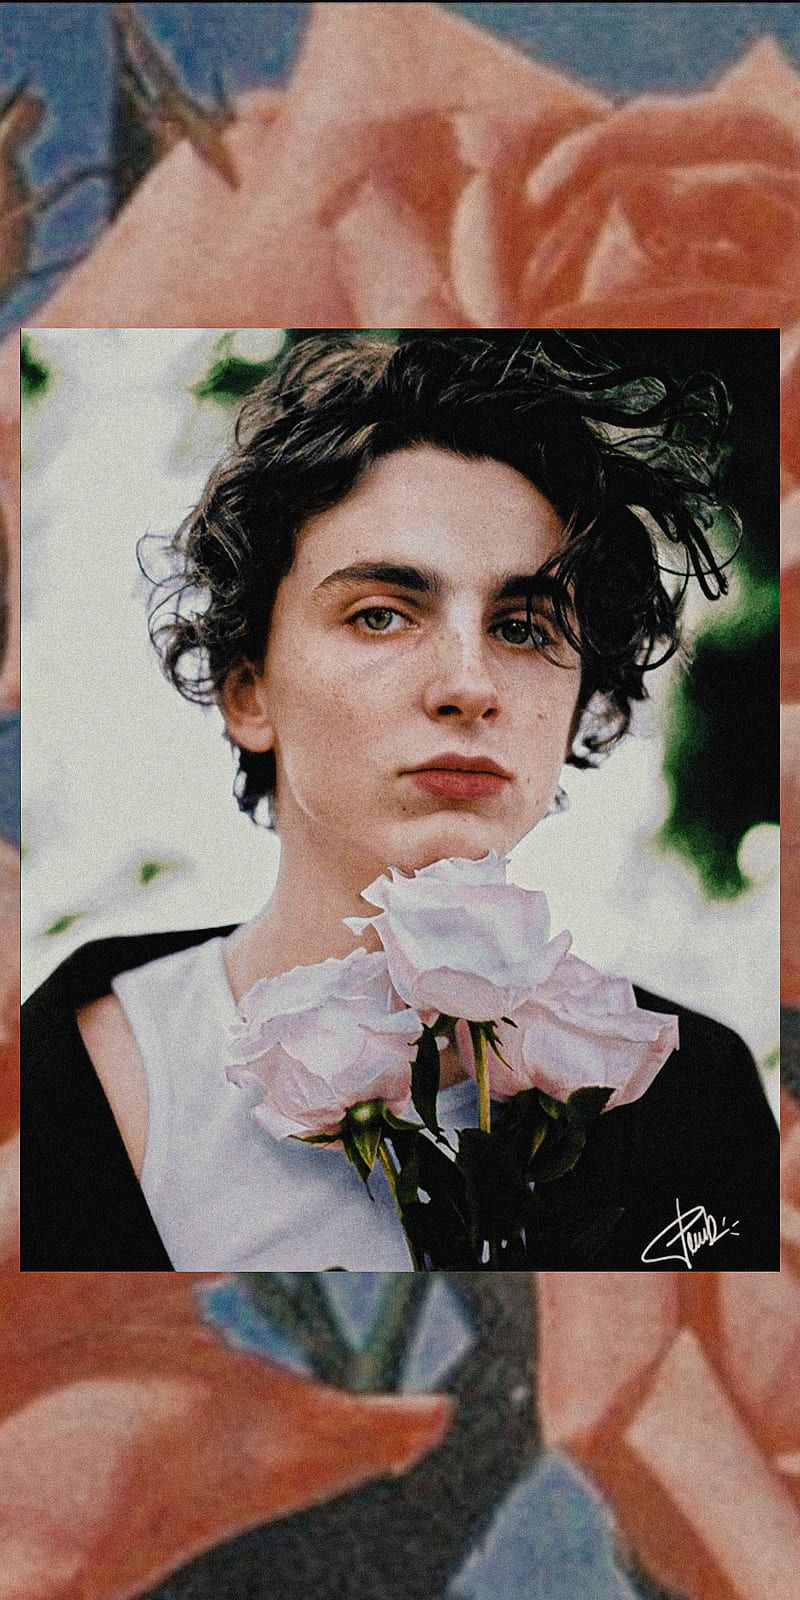 A picture of someone holding flowers - Timothee Chalamet